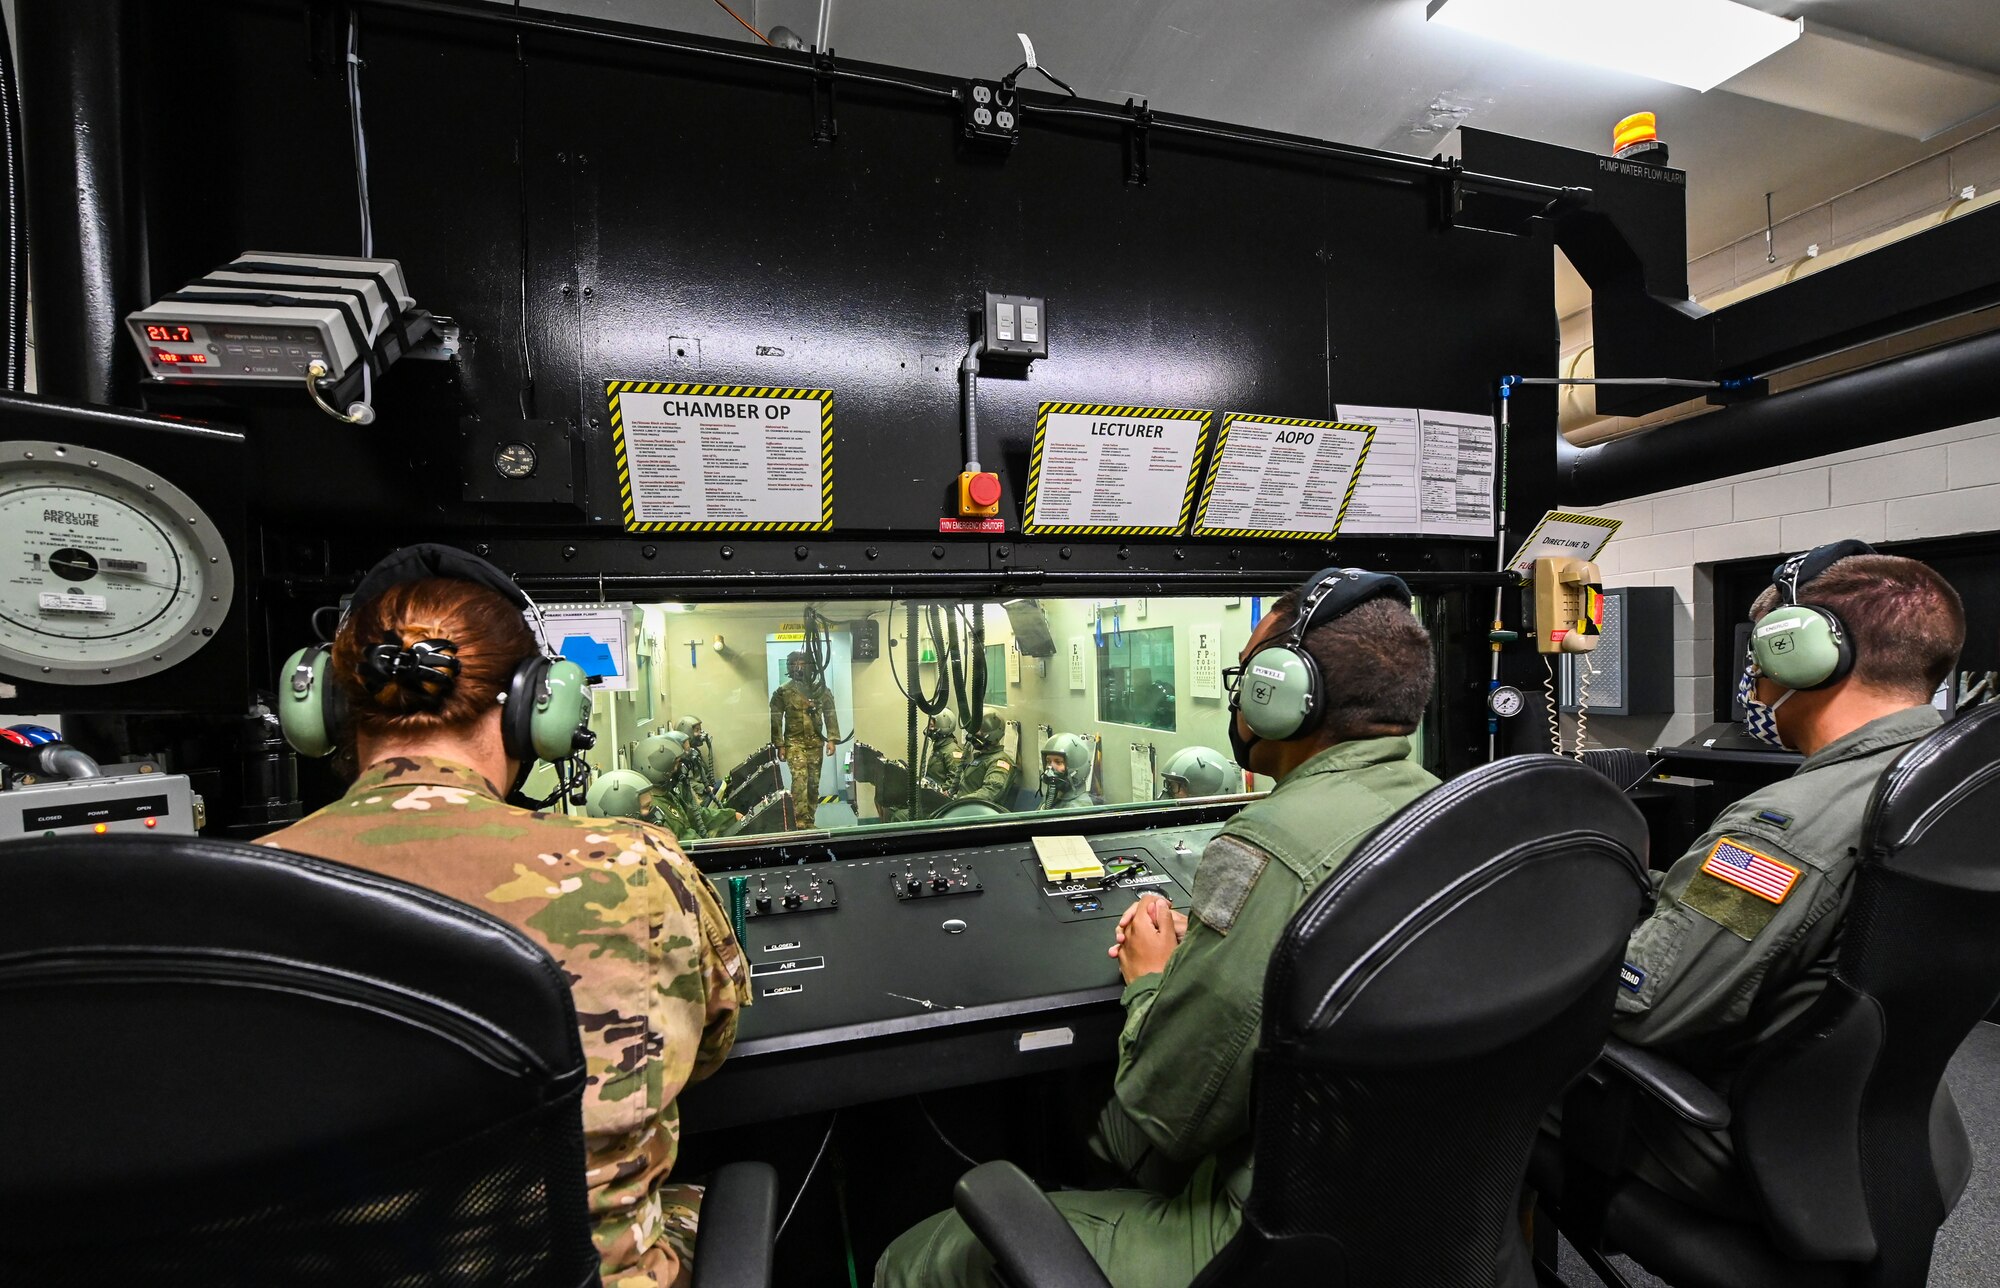 Three aerospace physiology specialists from the 14th Operational Medical Readiness Squadron observe as student pilots from the 23rd Flying Training Squadron at Fort Rucker, Alabama conduct hypobaric chamber training on August 21, 2020, at Columbus Air Force Base, Miss. The chamber provides a training system which replicates the effects of barometric pressure change on the human body. (U.S. Air Force photo by Airman 1st Class Davis Donaldson)